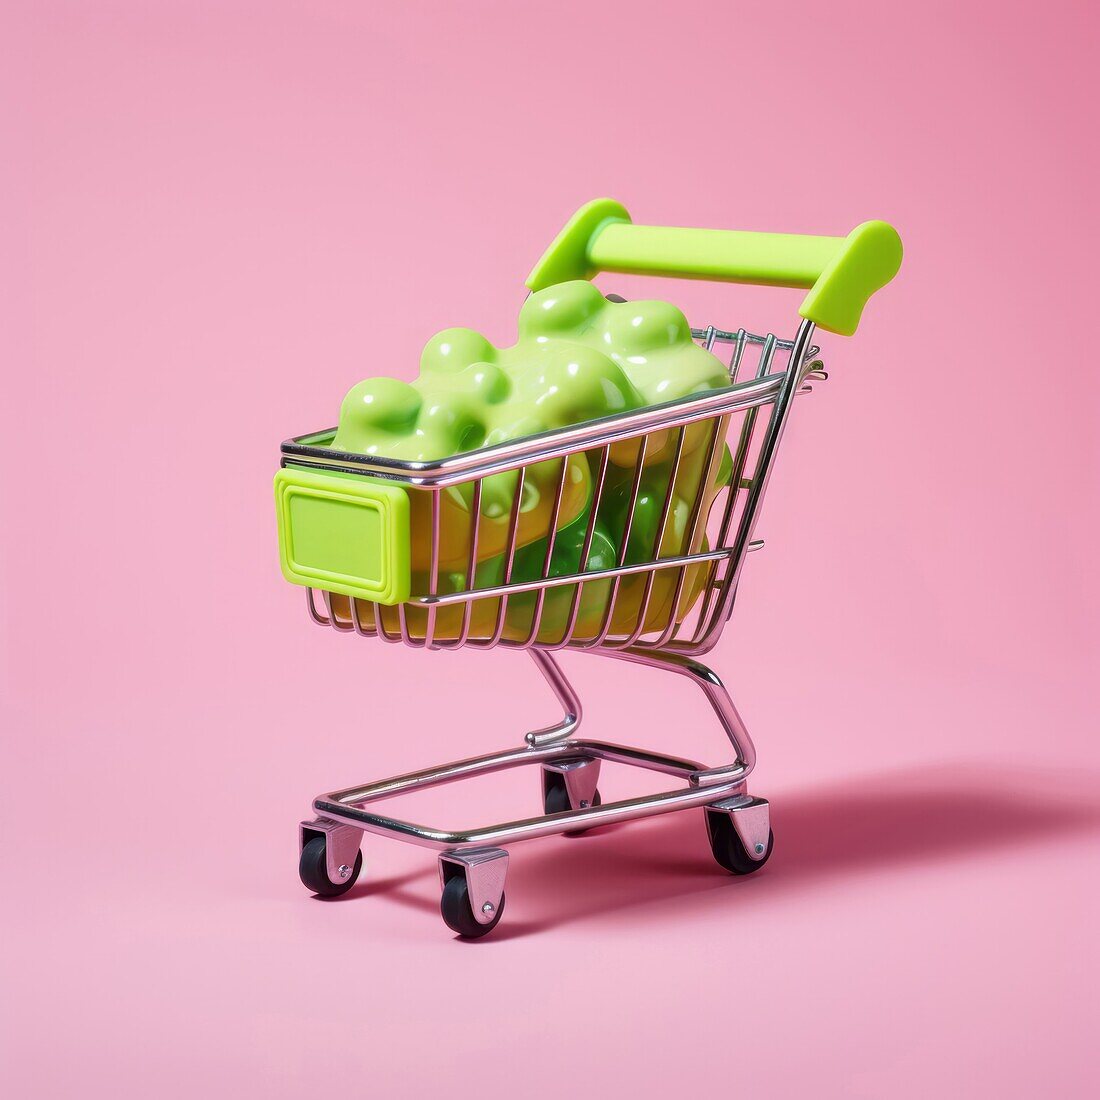 Composition of miniature shopping trolley with green mockup product placed on pink background